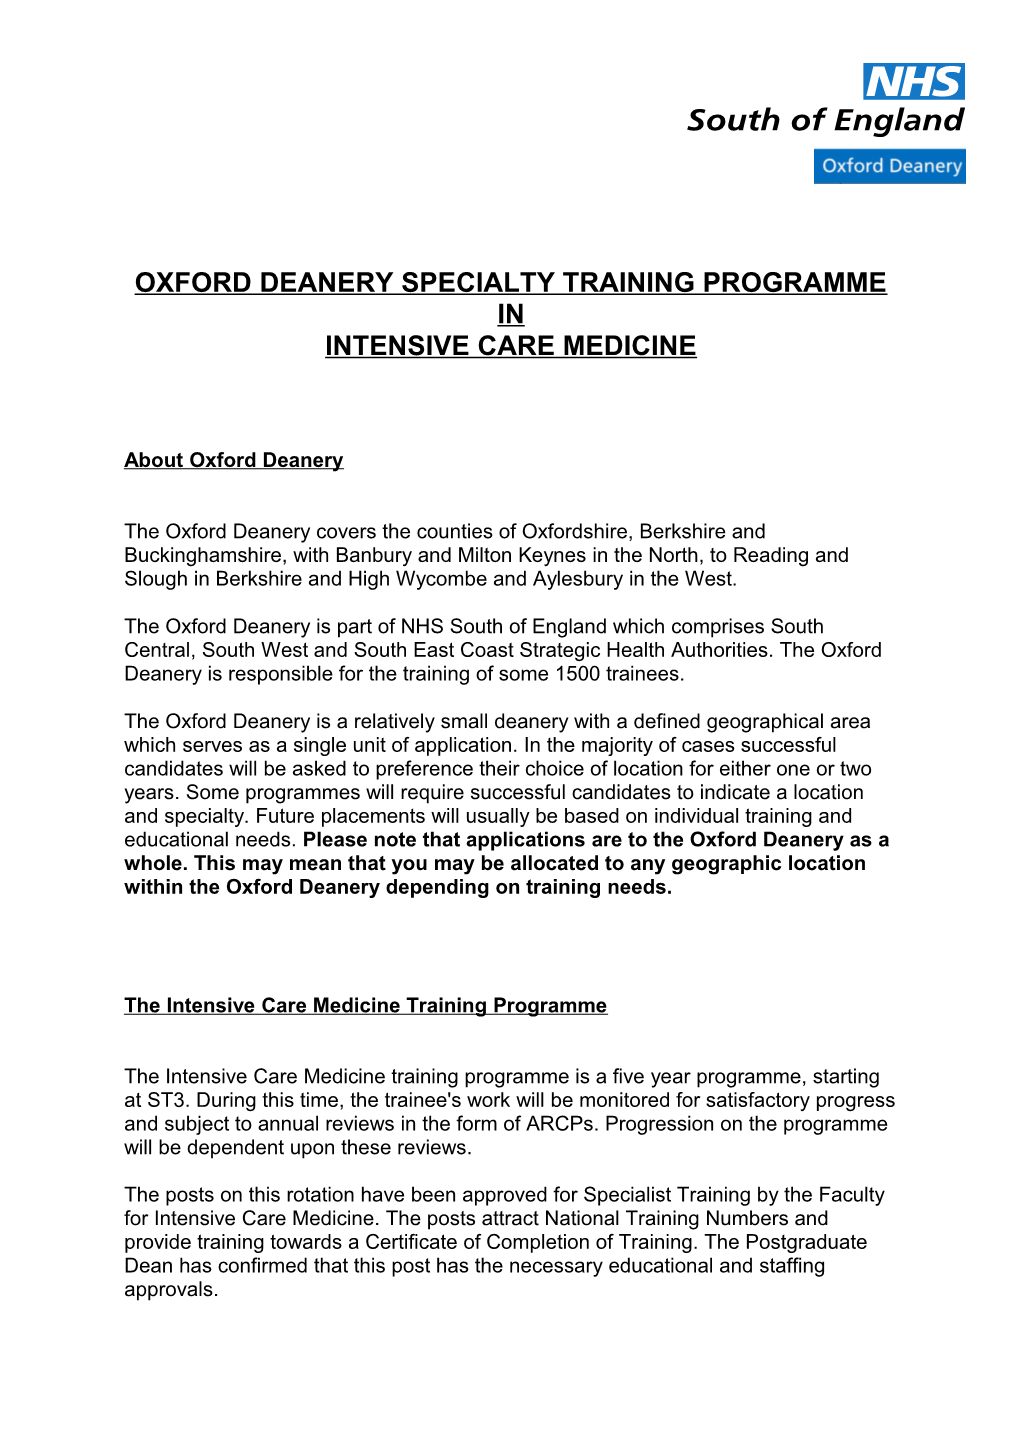 Oxford Deanery Specialty Training Programme In